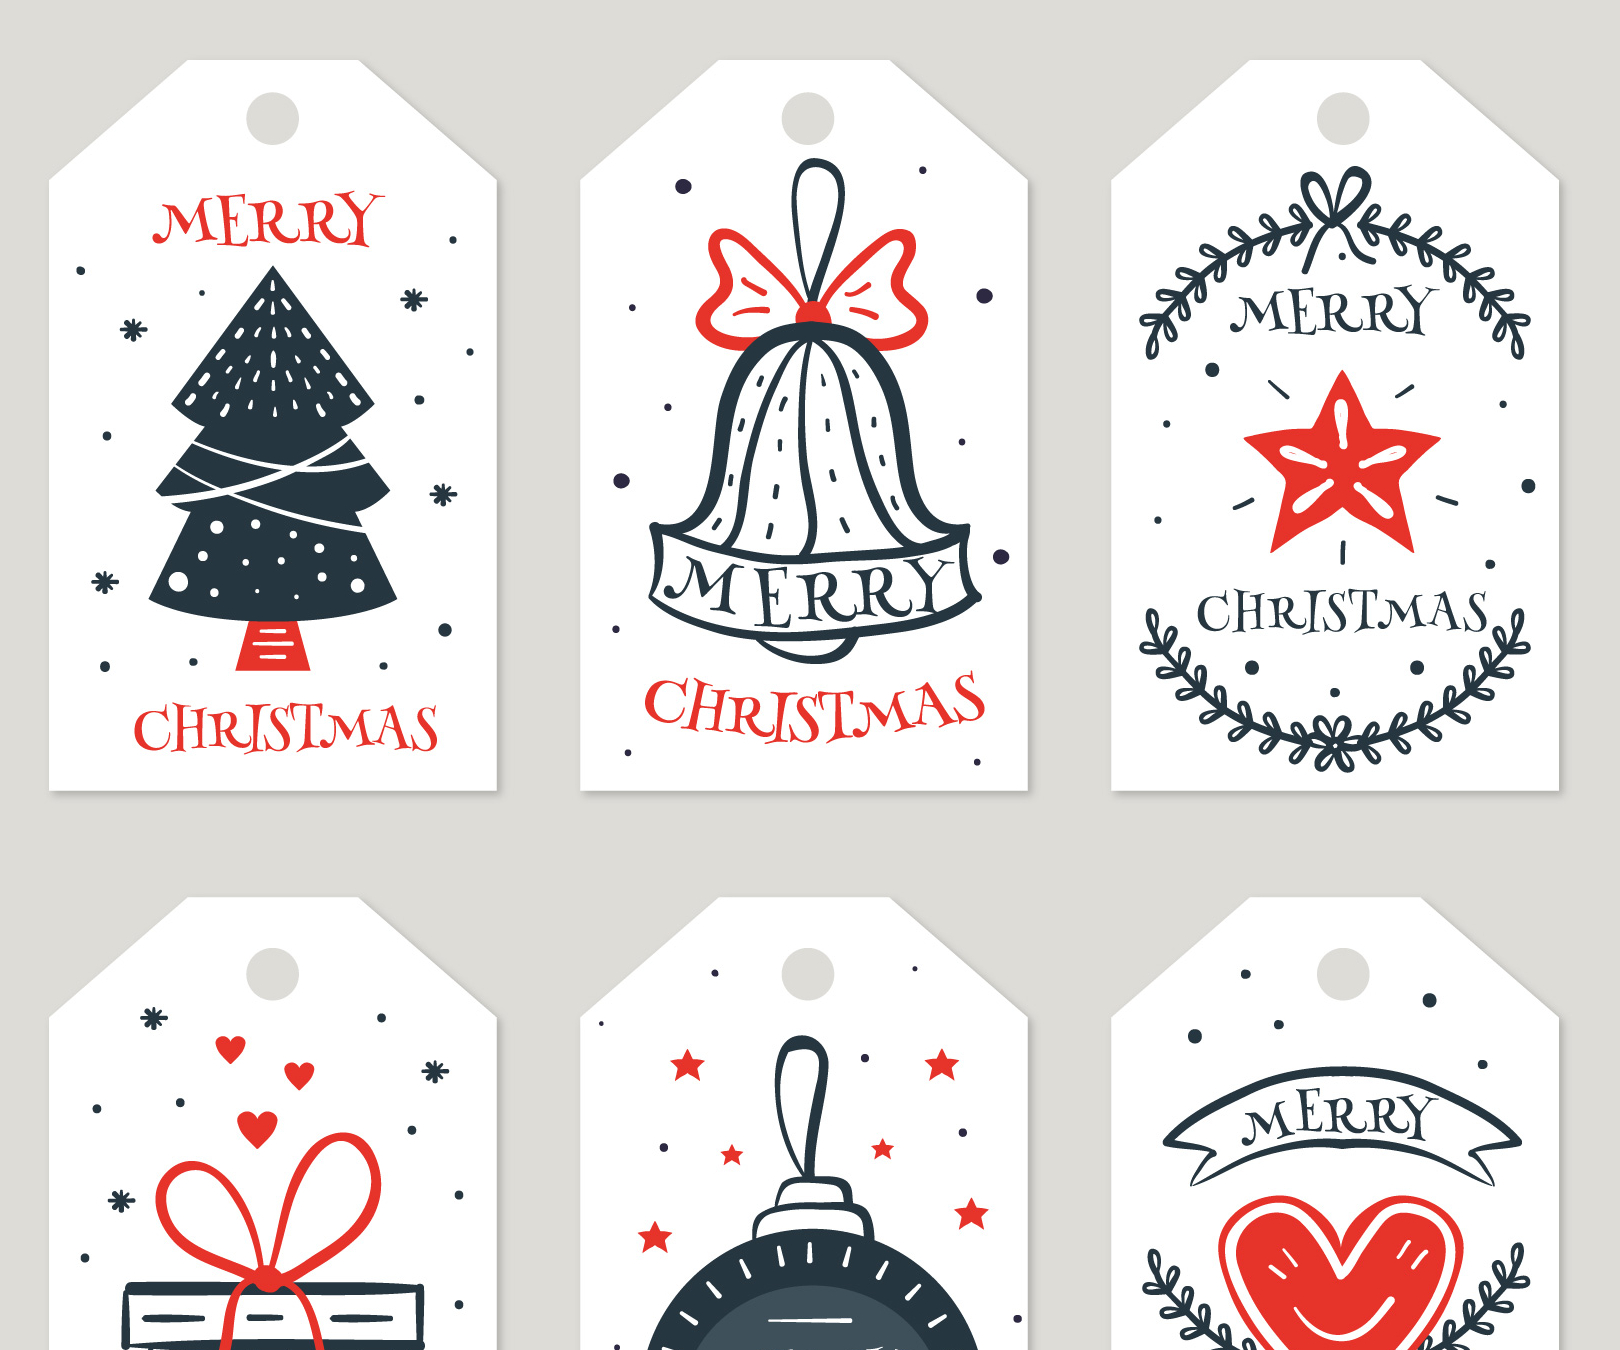 Create Gift Tags At Homeusing Microsoft® Word : 11 Steps For Free Gift Tag Templates For Word